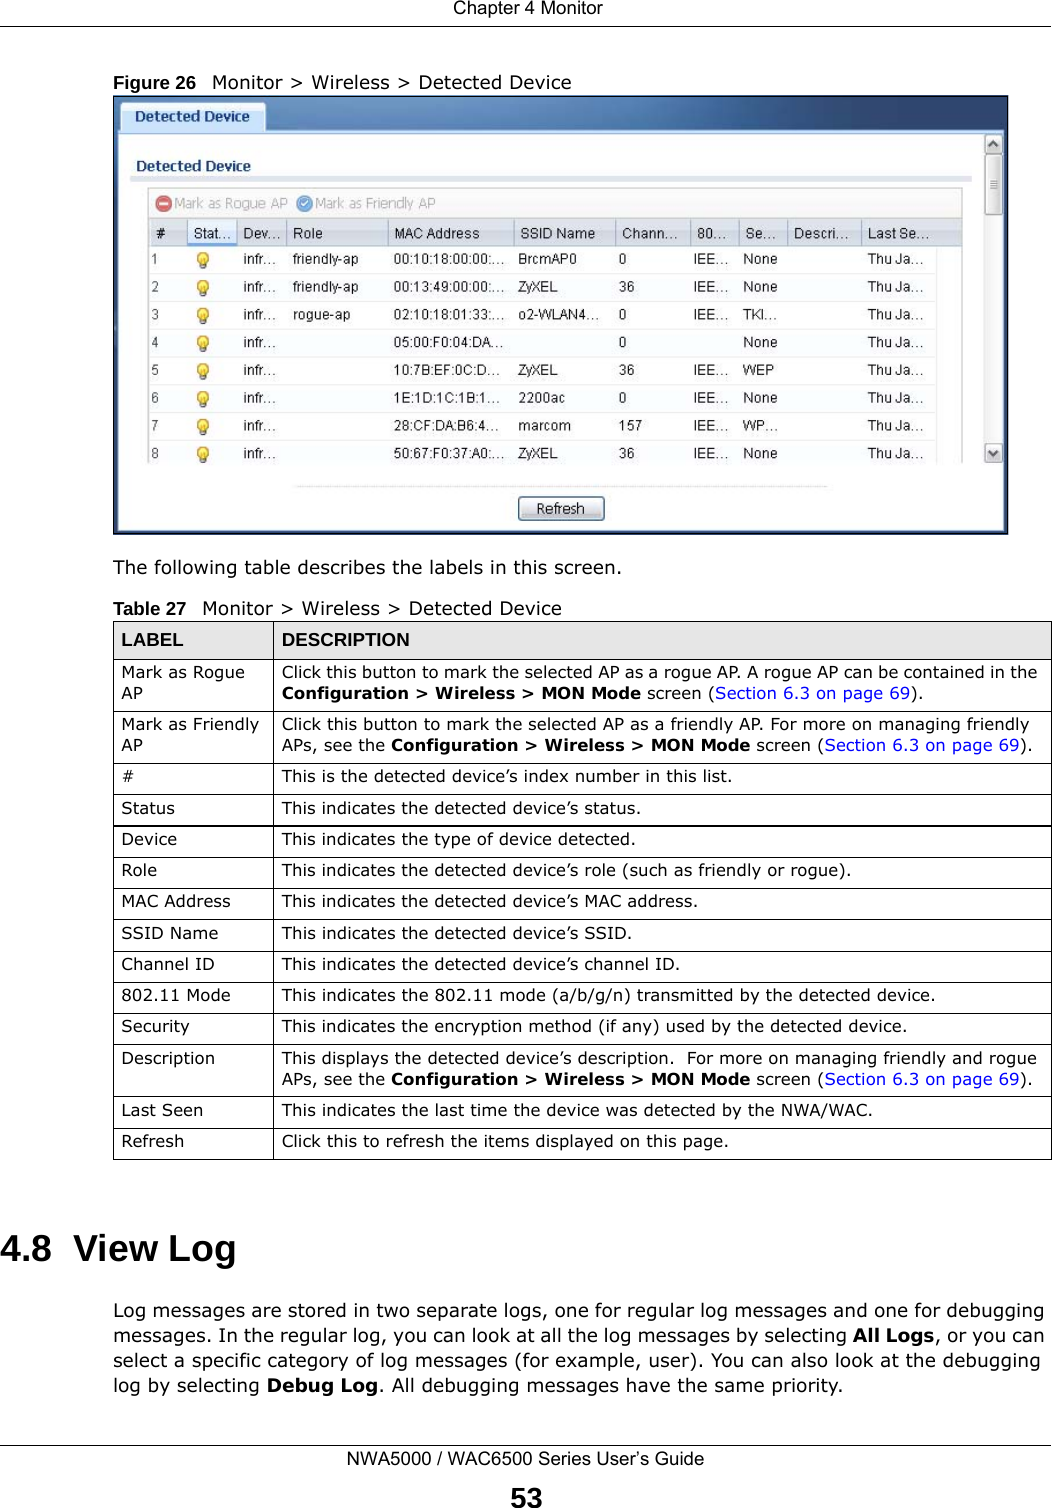  Chapter 4 MonitorNWA5000 / WAC6500 Series User’s Guide53Figure 26   Monitor &gt; Wireless &gt; Detected Device  The following table describes the labels in this screen. 4.8  View LogLog messages are stored in two separate logs, one for regular log messages and one for debugging messages. In the regular log, you can look at all the log messages by selecting All Logs, or you can select a specific category of log messages (for example, user). You can also look at the debugging log by selecting Debug Log. All debugging messages have the same priority. Table 27   Monitor &gt; Wireless &gt; Detected DeviceLABEL DESCRIPTIONMark as Rogue APClick this button to mark the selected AP as a rogue AP. A rogue AP can be contained in the Configuration &gt; Wireless &gt; MON Mode screen (Section 6.3 on page 69).Mark as Friendly APClick this button to mark the selected AP as a friendly AP. For more on managing friendly APs, see the Configuration &gt; Wireless &gt; MON Mode screen (Section 6.3 on page 69).# This is the detected device’s index number in this list.Status This indicates the detected device’s status.Device This indicates the type of device detected.Role This indicates the detected device’s role (such as friendly or rogue).MAC Address This indicates the detected device’s MAC address.SSID Name This indicates the detected device’s SSID.Channel ID This indicates the detected device’s channel ID.802.11 Mode This indicates the 802.11 mode (a/b/g/n) transmitted by the detected device.Security This indicates the encryption method (if any) used by the detected device.Description This displays the detected device’s description.  For more on managing friendly and rogue APs, see the Configuration &gt; Wireless &gt; MON Mode screen (Section 6.3 on page 69).Last Seen This indicates the last time the device was detected by the NWA/WAC.Refresh Click this to refresh the items displayed on this page.